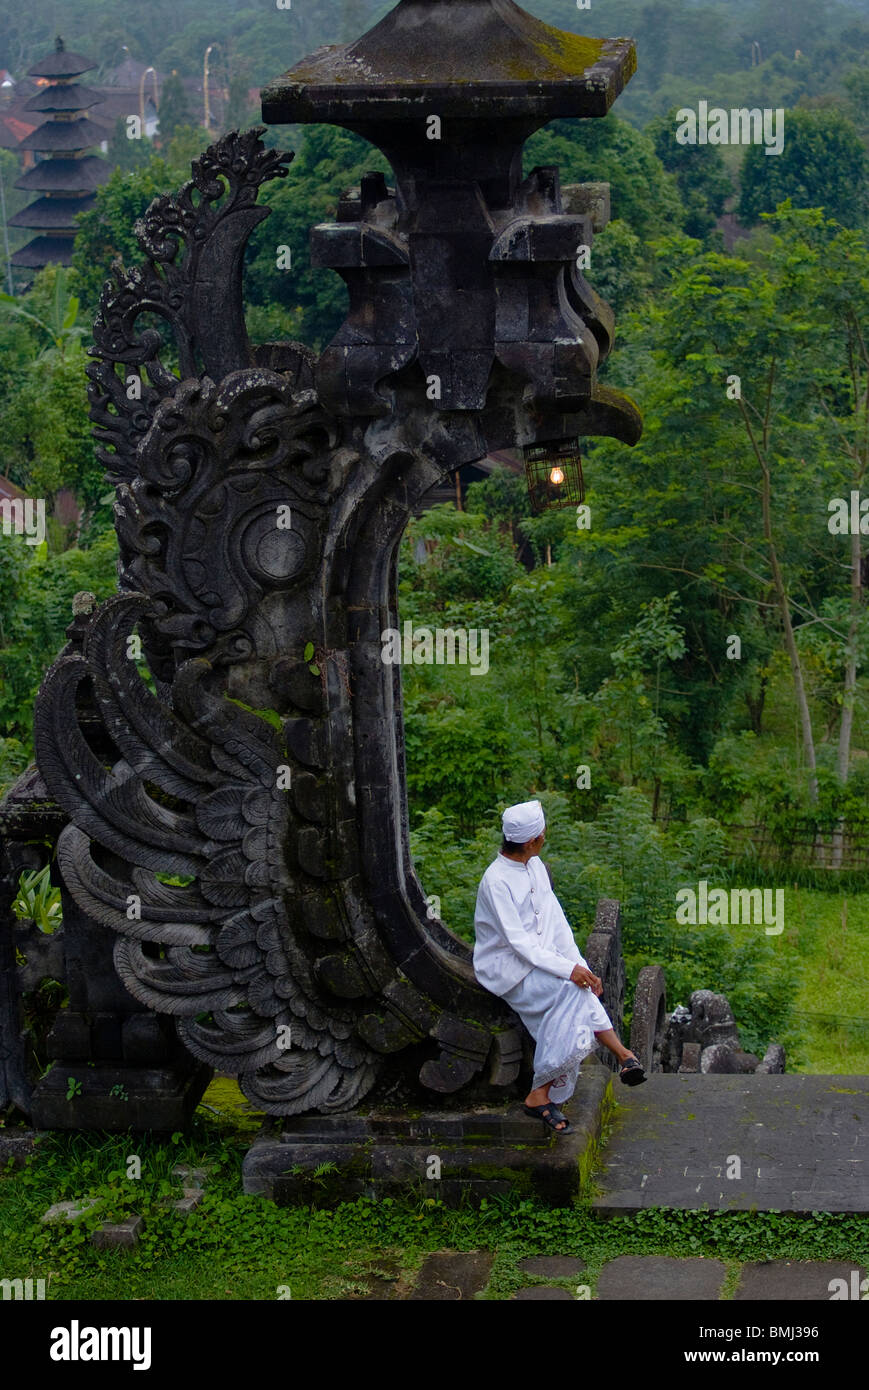 A Hindu holy man takes time for meditation at Pura Besakih, the Mother Temple also known as Pura Besakih in Bali, Indonesia. Stock Photo